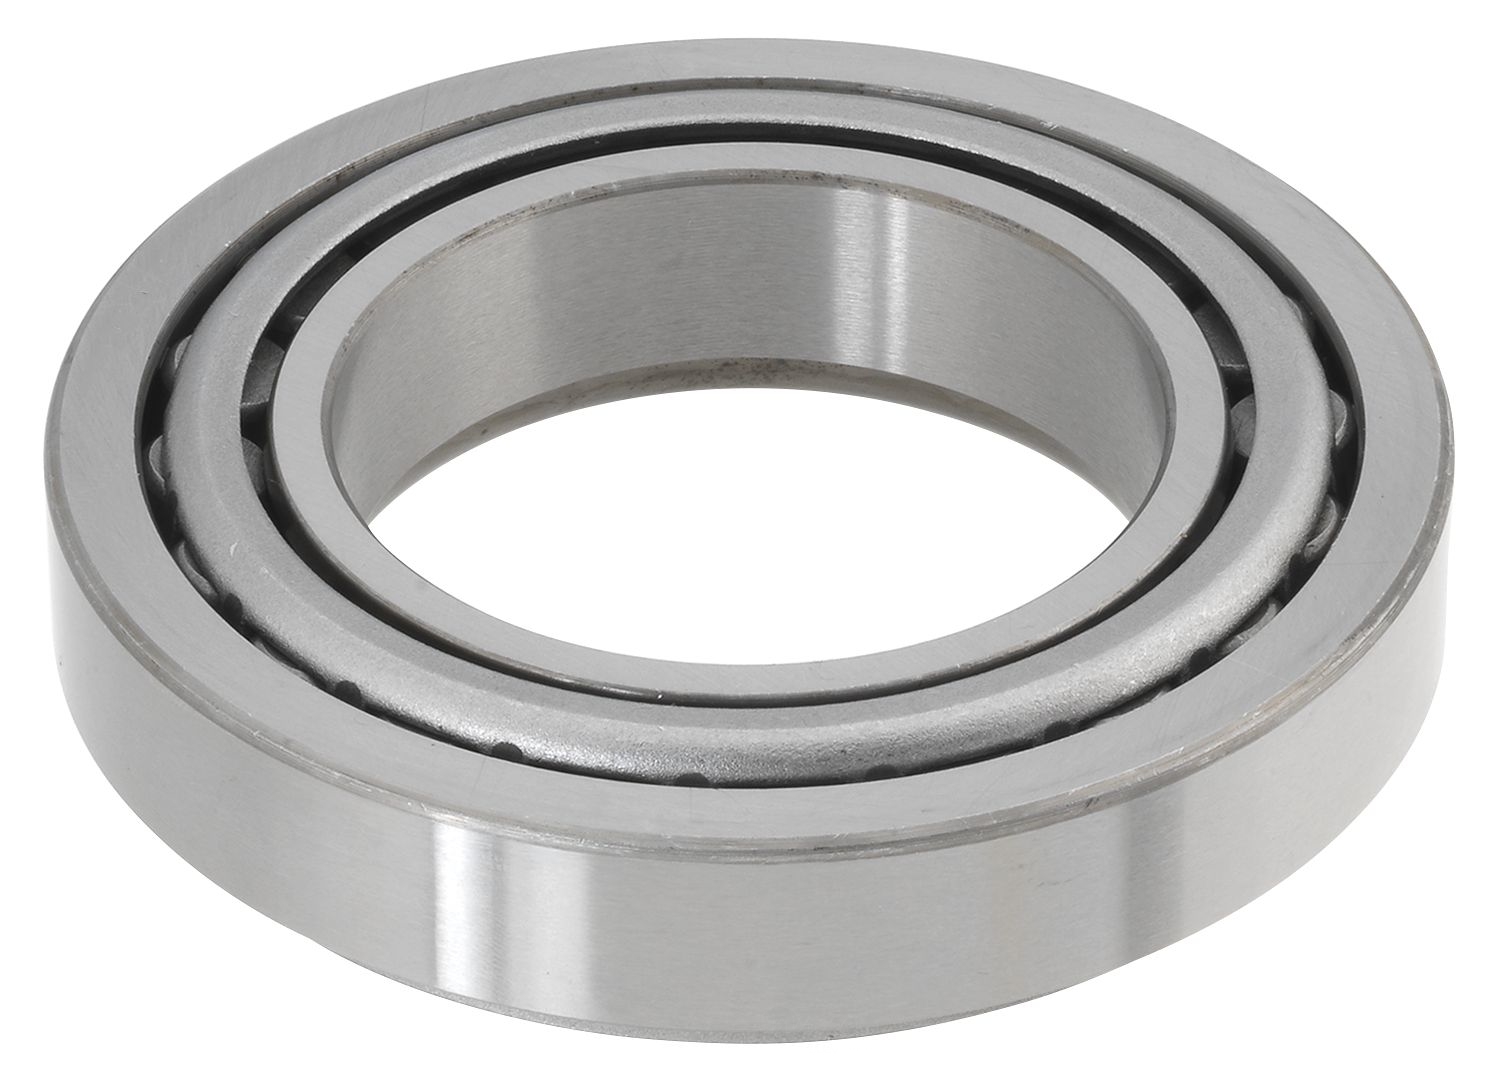 SKF (CHICAGO RAWHIDE) - Axle Differential Bearing (Rear) - SKF BR101